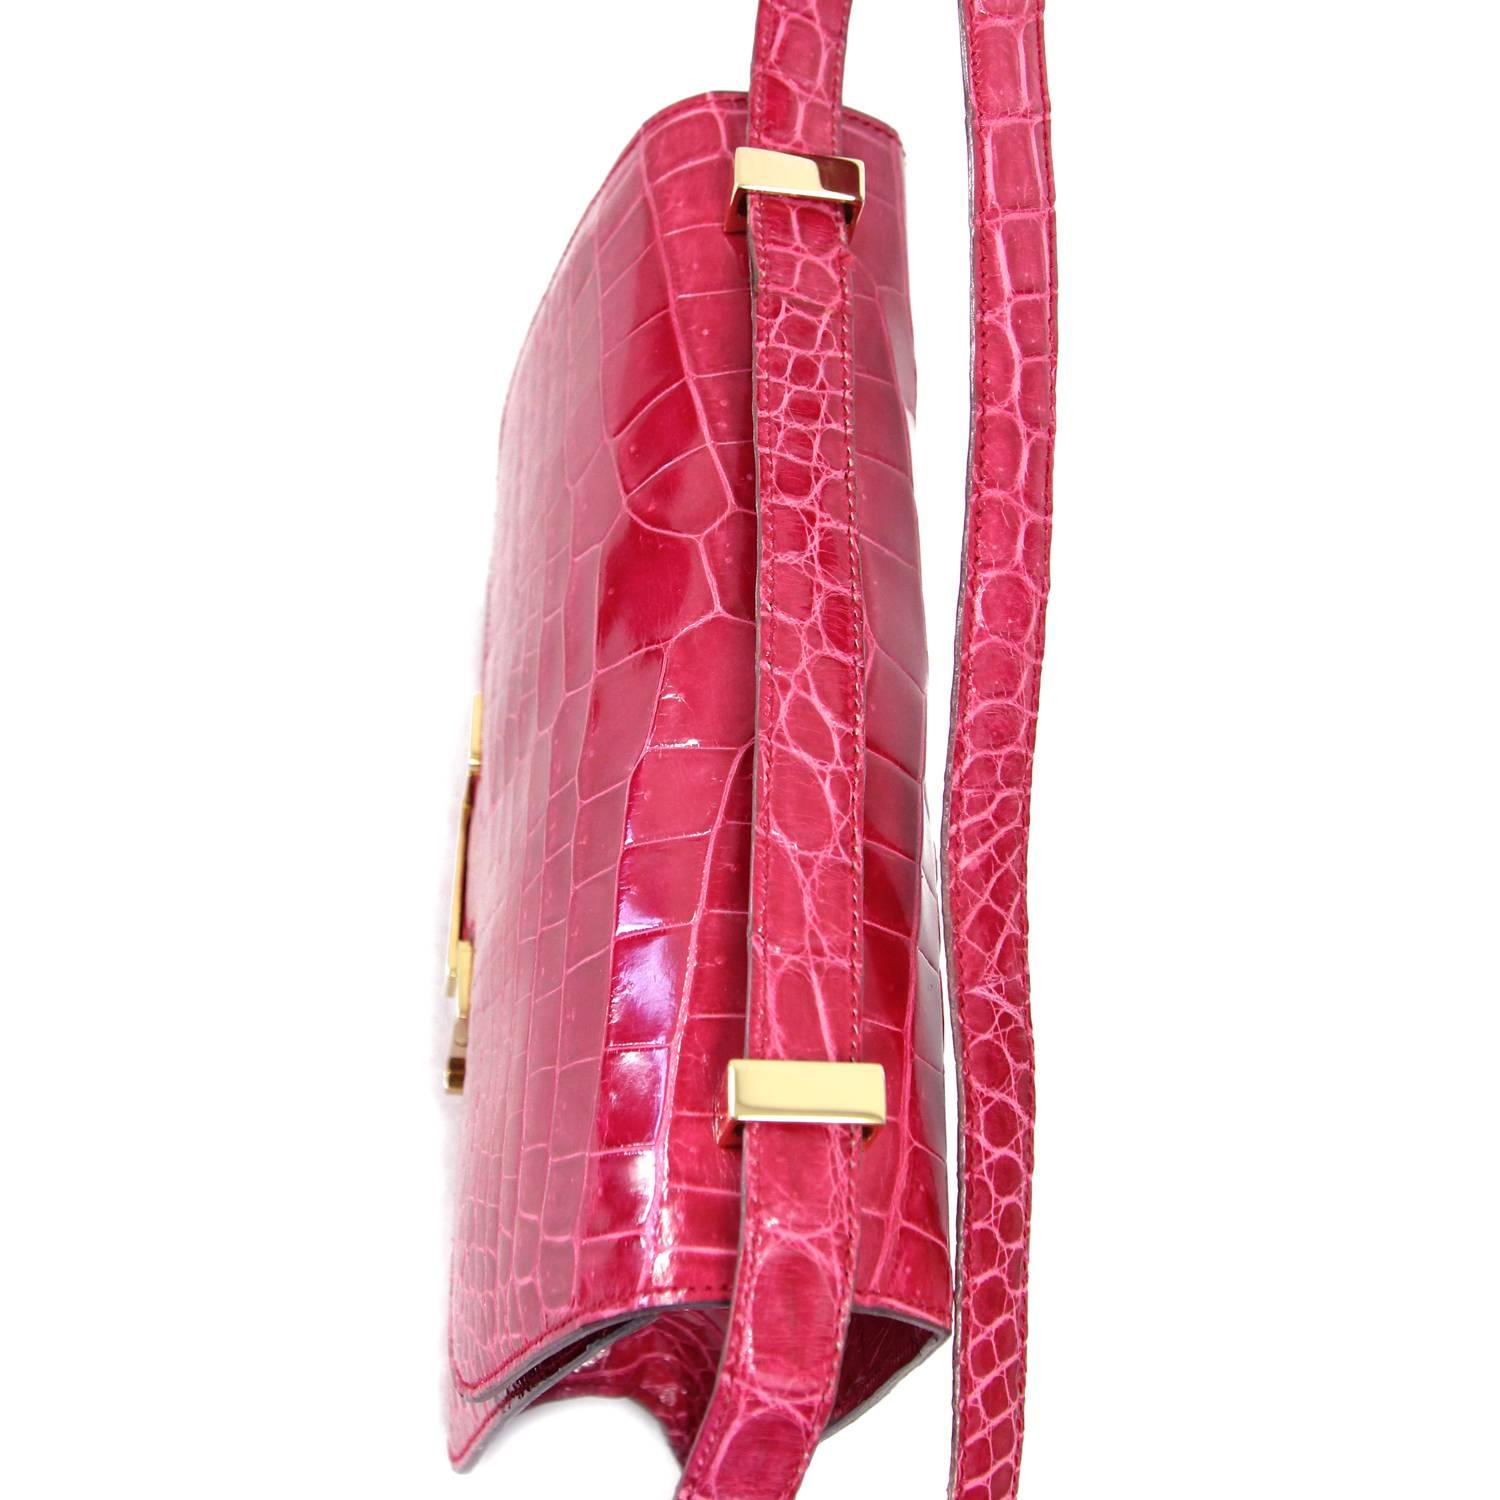 Vivid fuchsia crocodile leather crossbody bag made by Corradi Parma with golden hardware. The bag is inspired by the iconic Hermès Constance bag and shows a metal "H" snap lock closure. The item comes with a small purple leather wallet. It